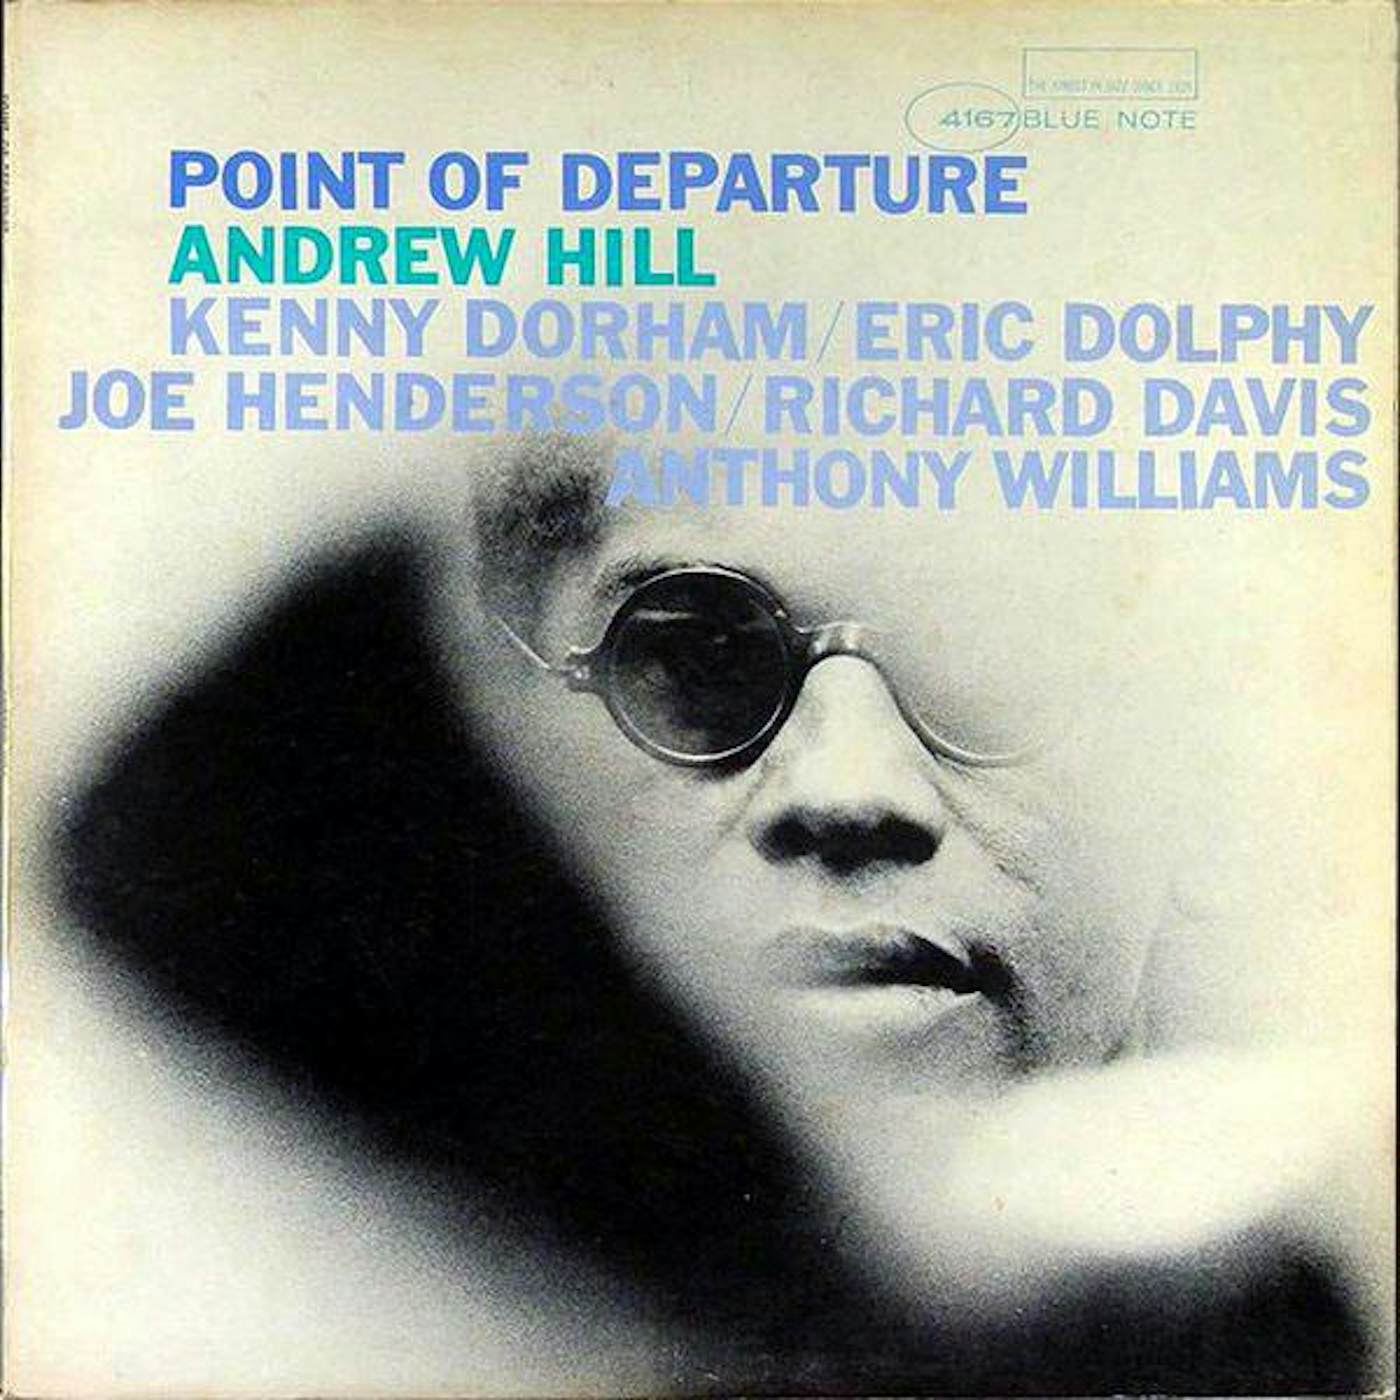 Andrew Hill POINT OF DEPARTURE Vinyl Record - Gatefold Sleeve, Limited Edition, 180 Gram Pressing, Remastered